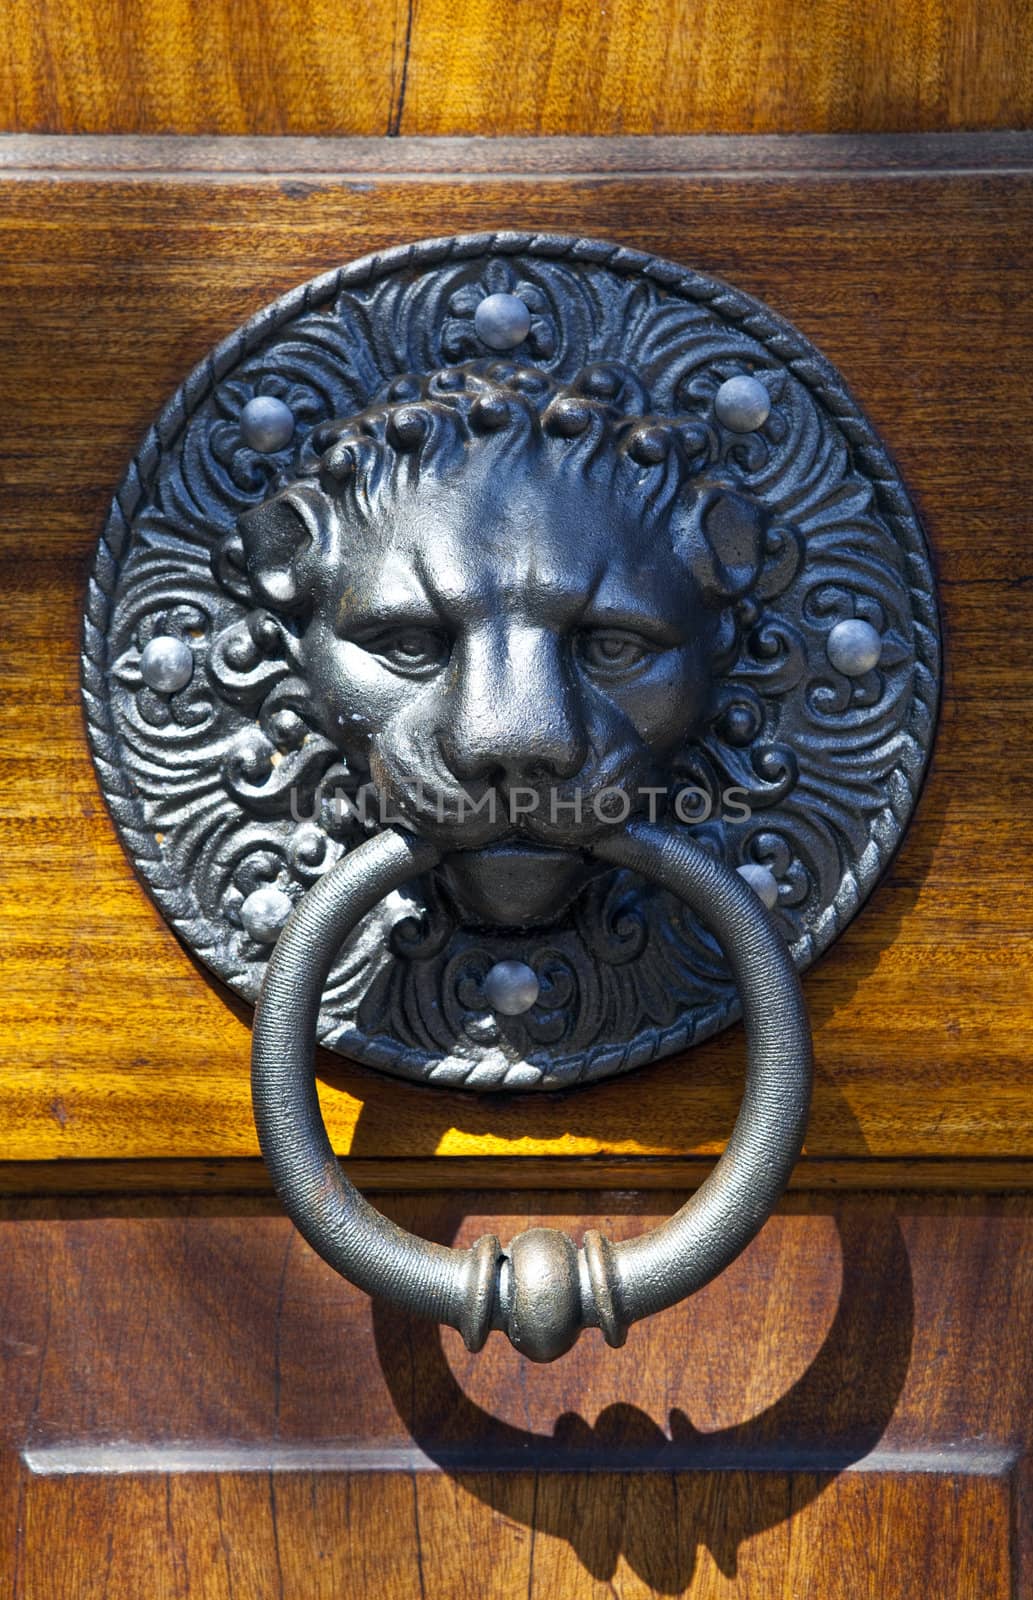 Door knocker at the entrance to the Greek cathedral of St. Sophia in London.